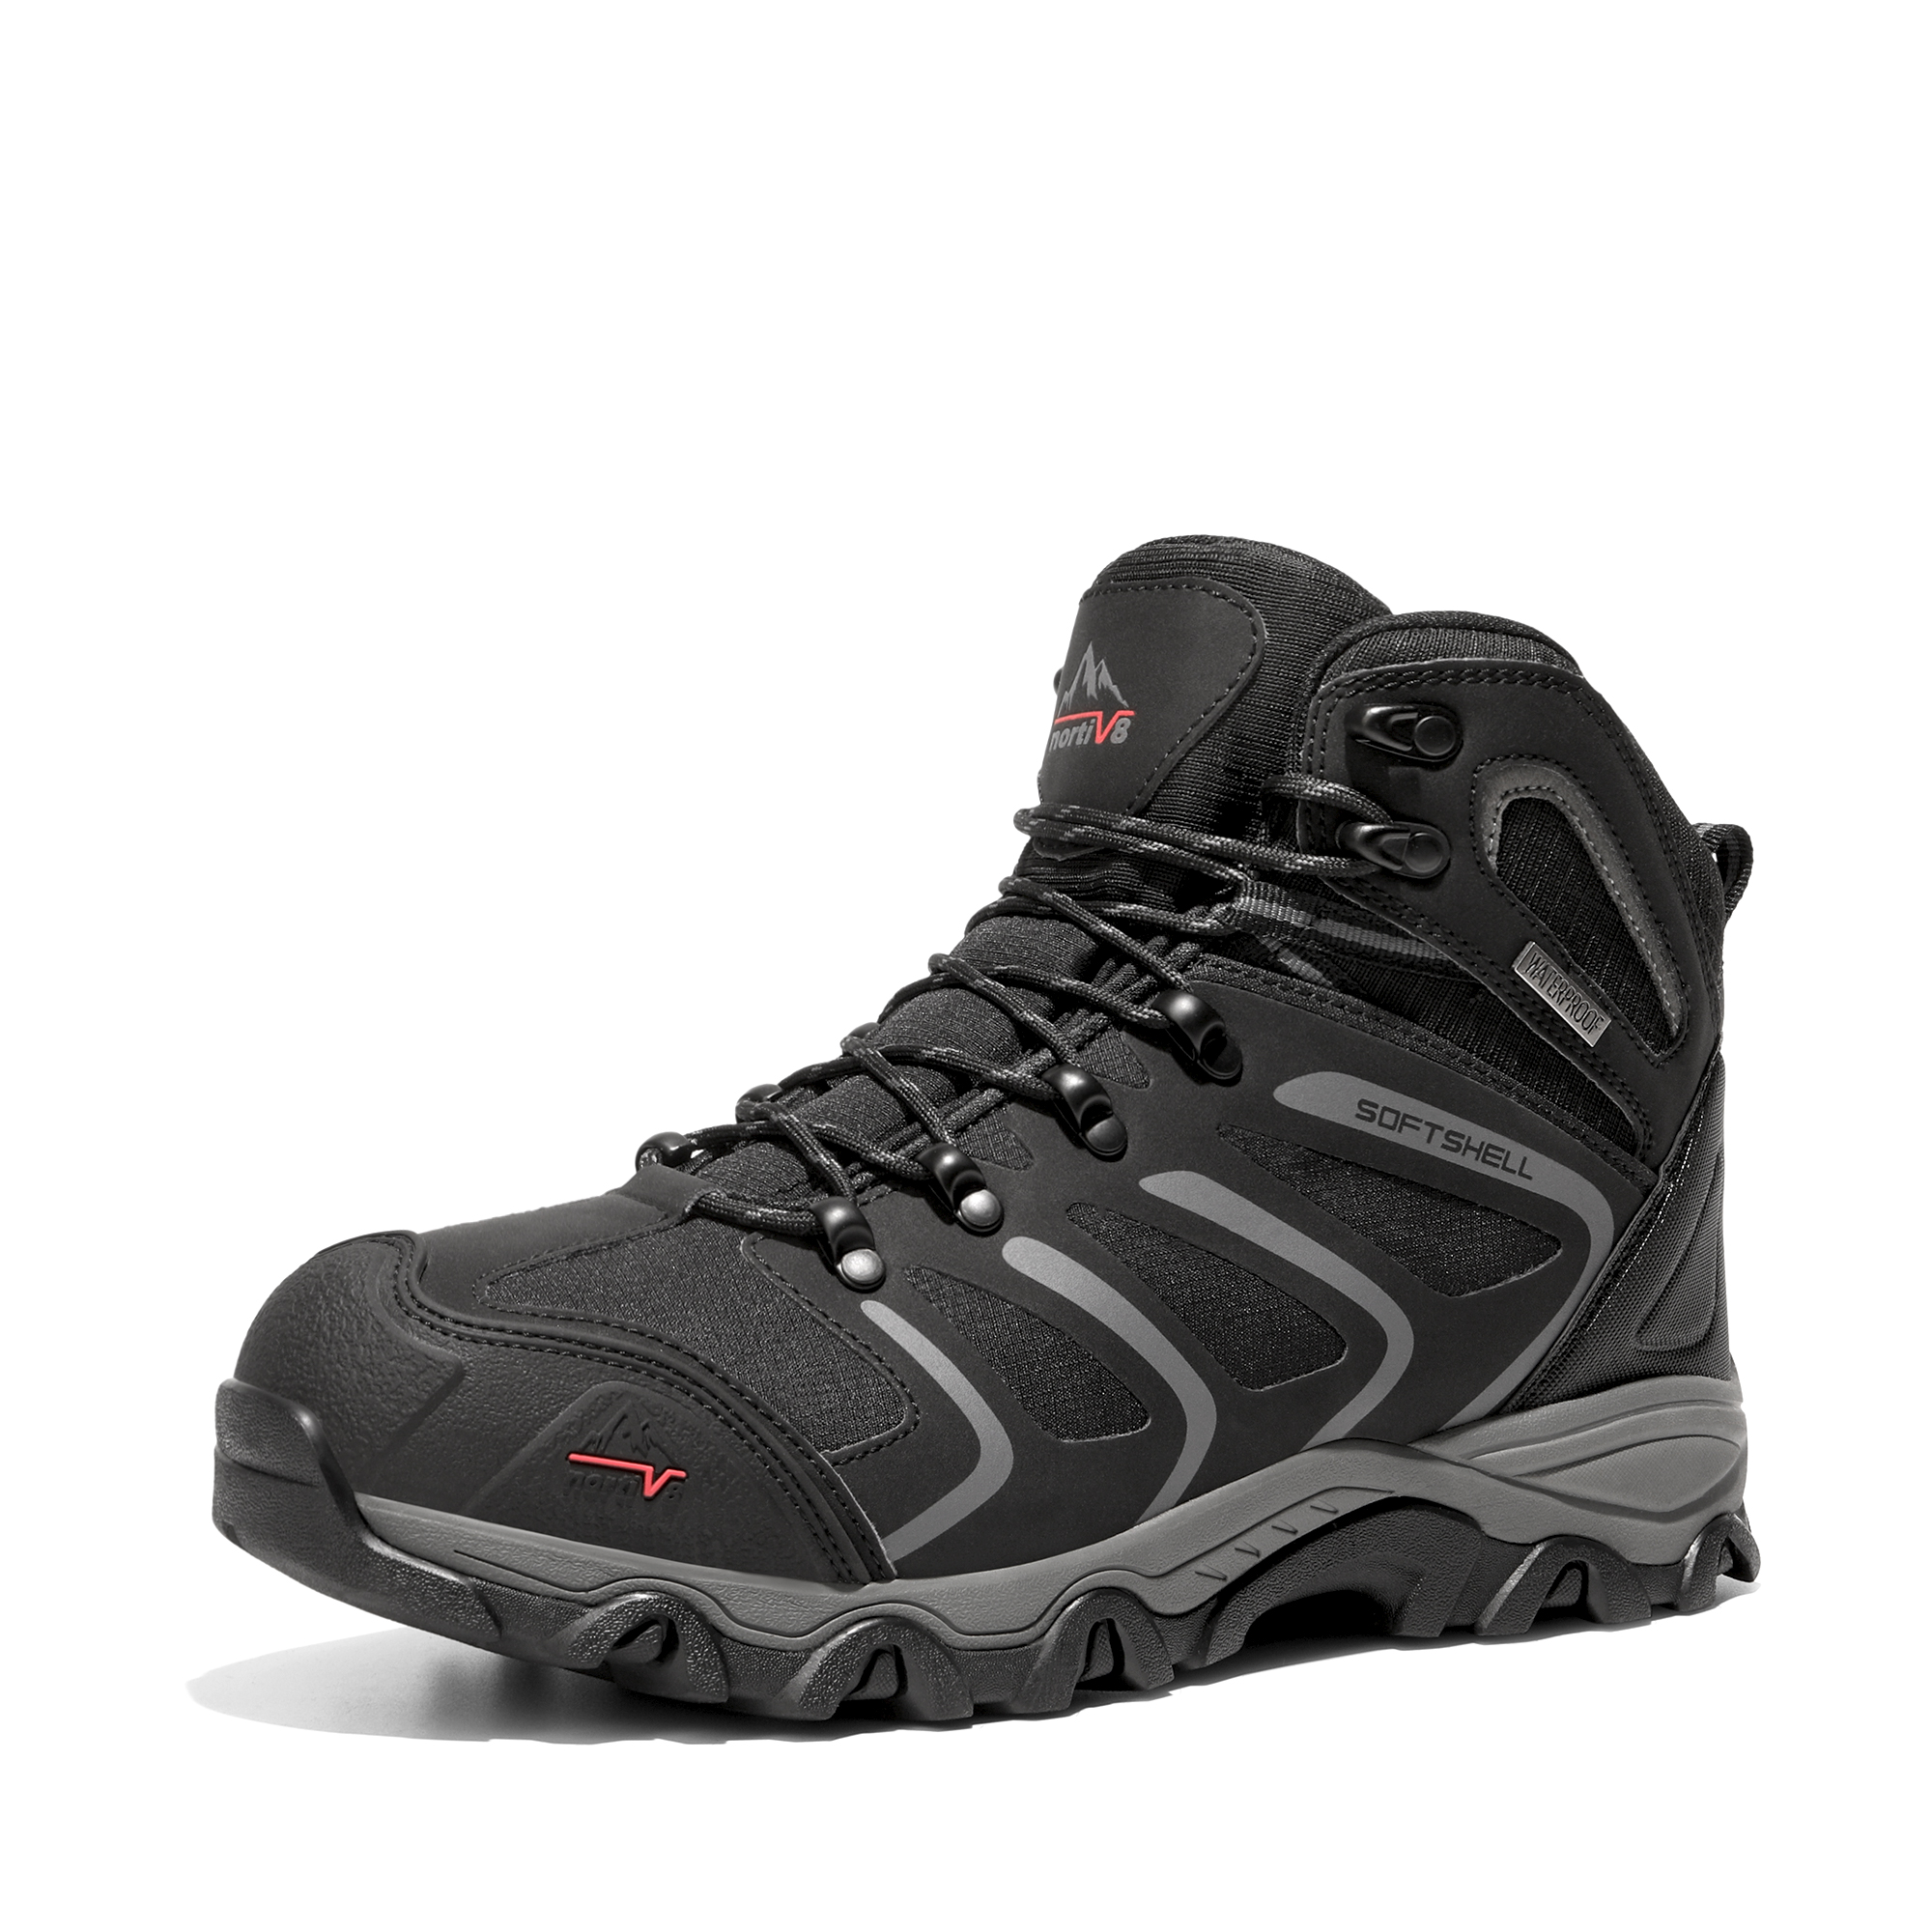 NORTIV 8 Men's Ankle High Waterproof Hiking Boots Kuwait